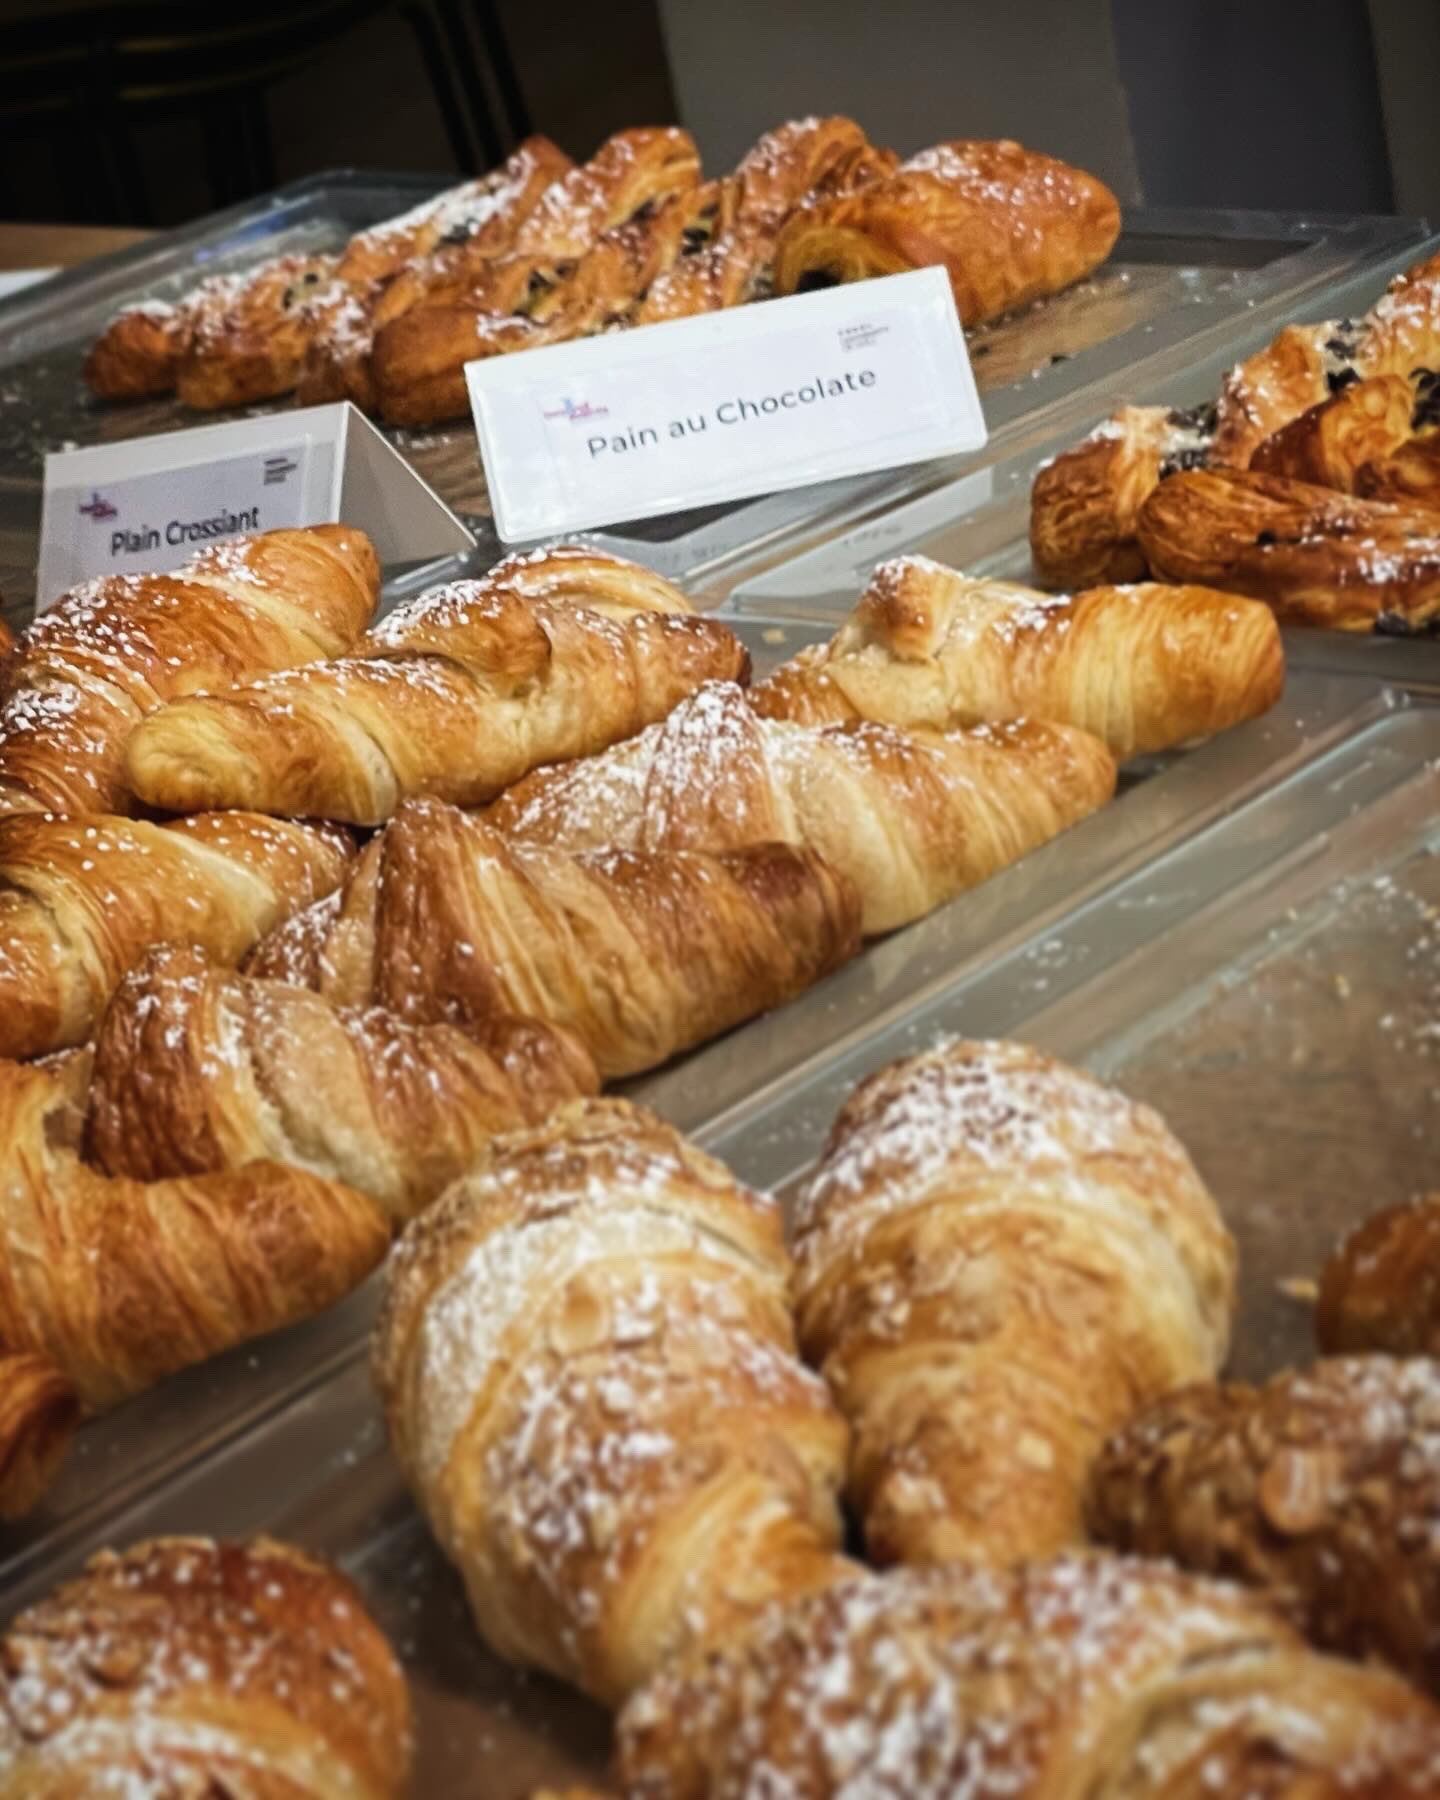 Croissant and Pain au Chocolate